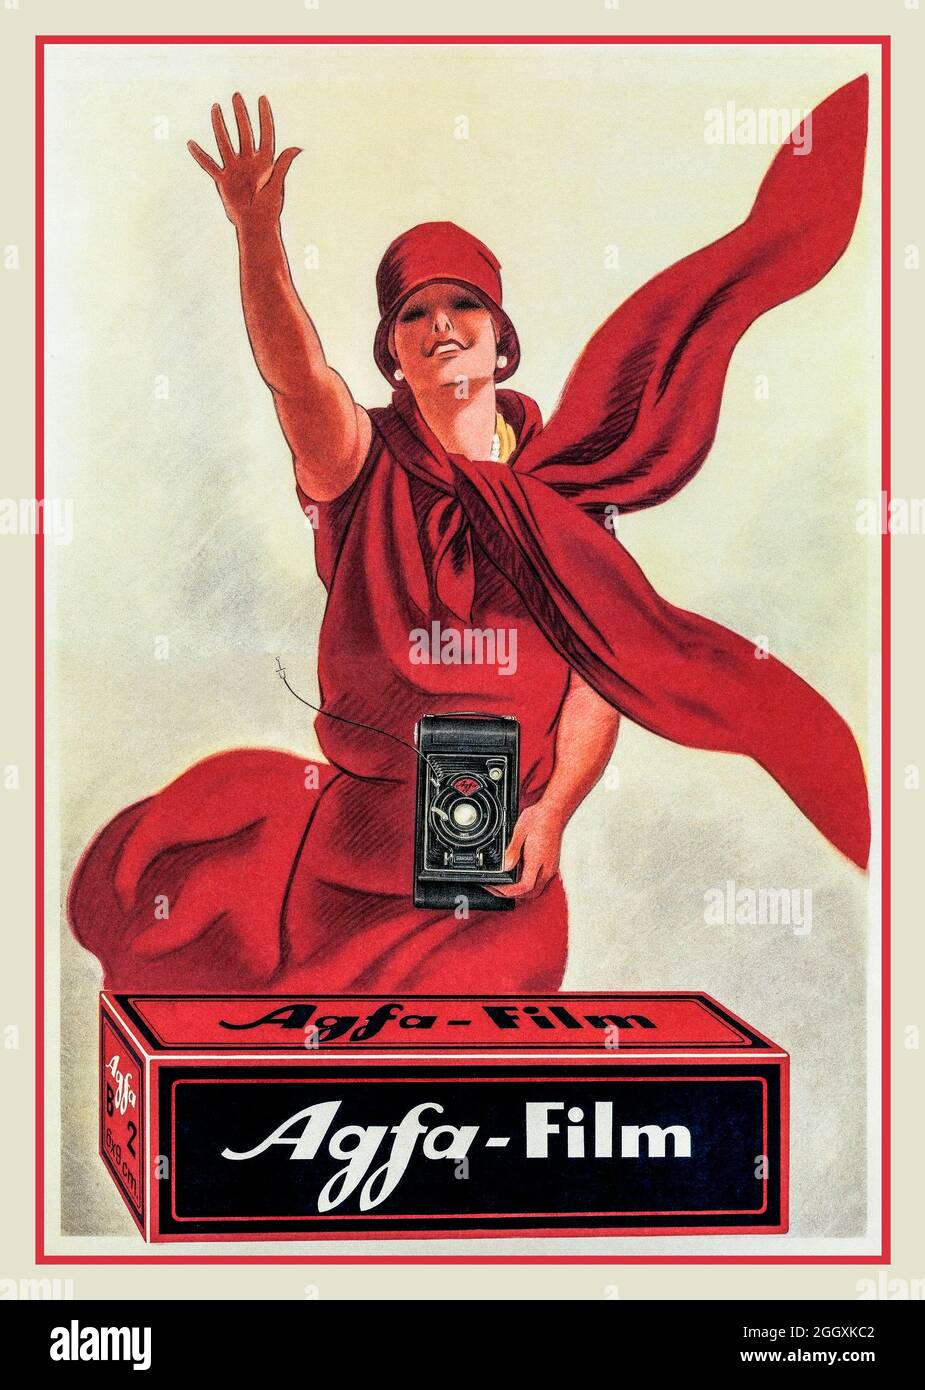 Advertising D'Epoca Agfa Y4439 Items Photo Agfa 1929 Old Advertising 